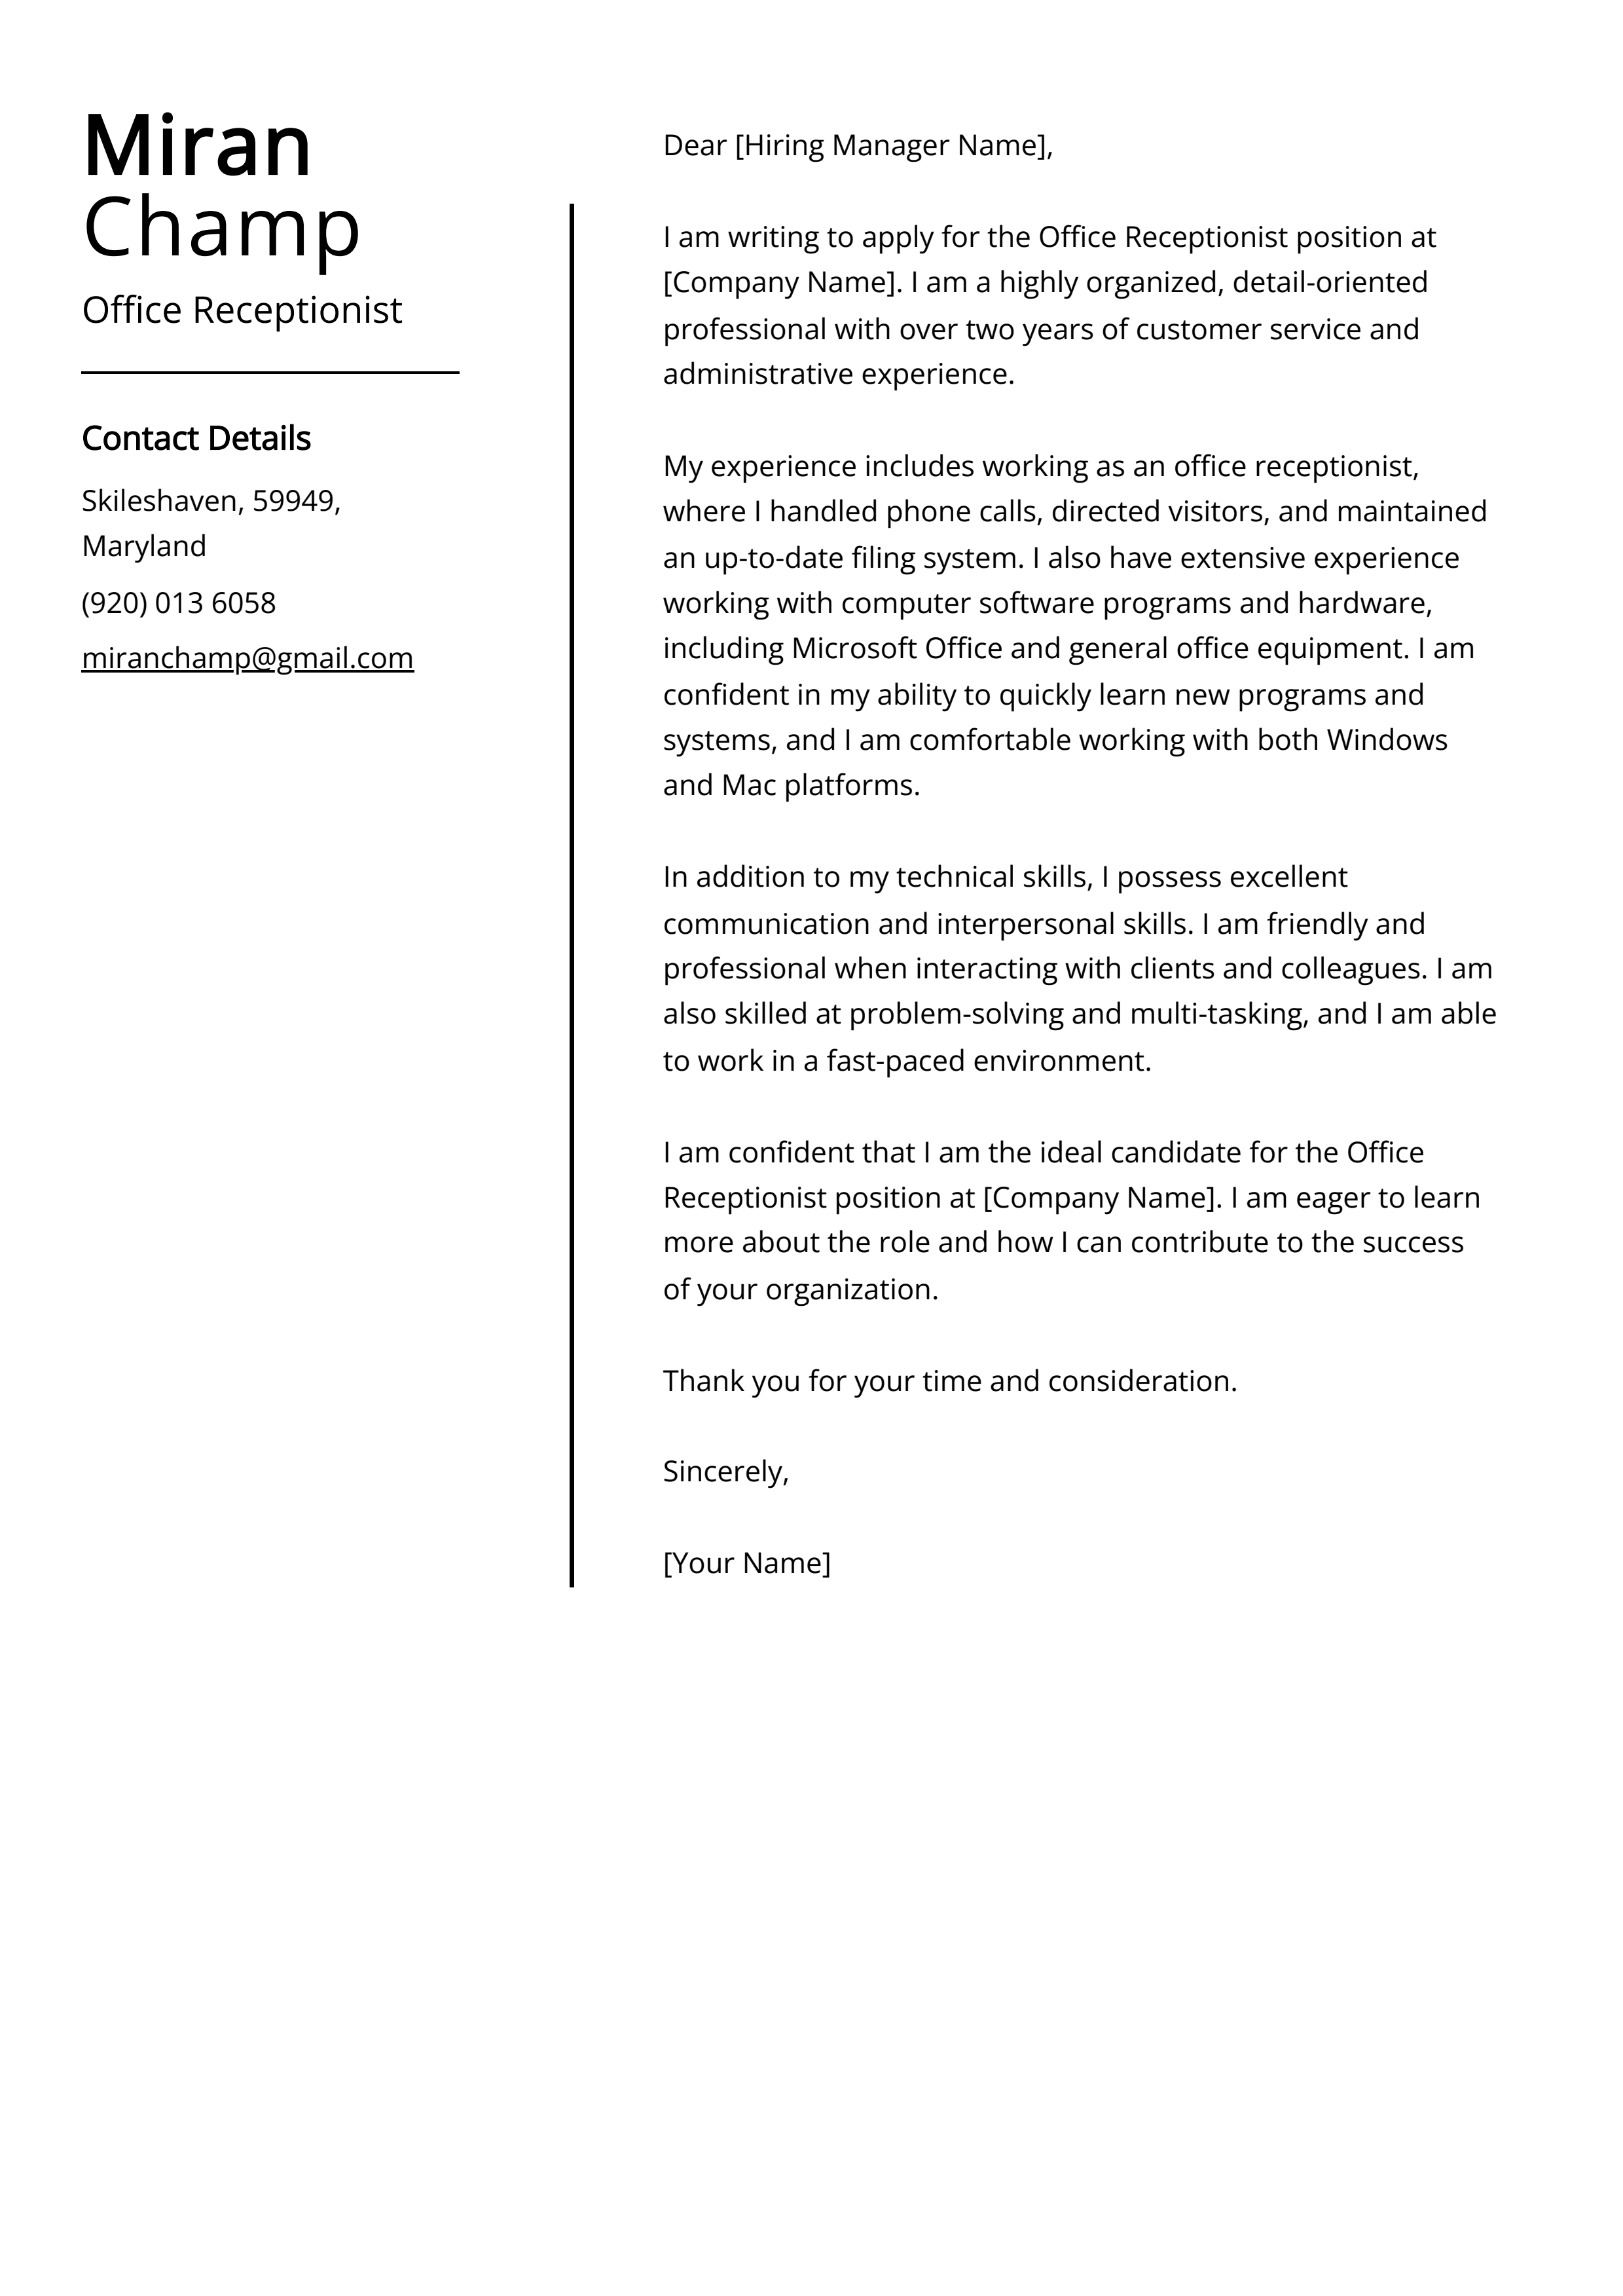 Office Receptionist Cover Letter Example